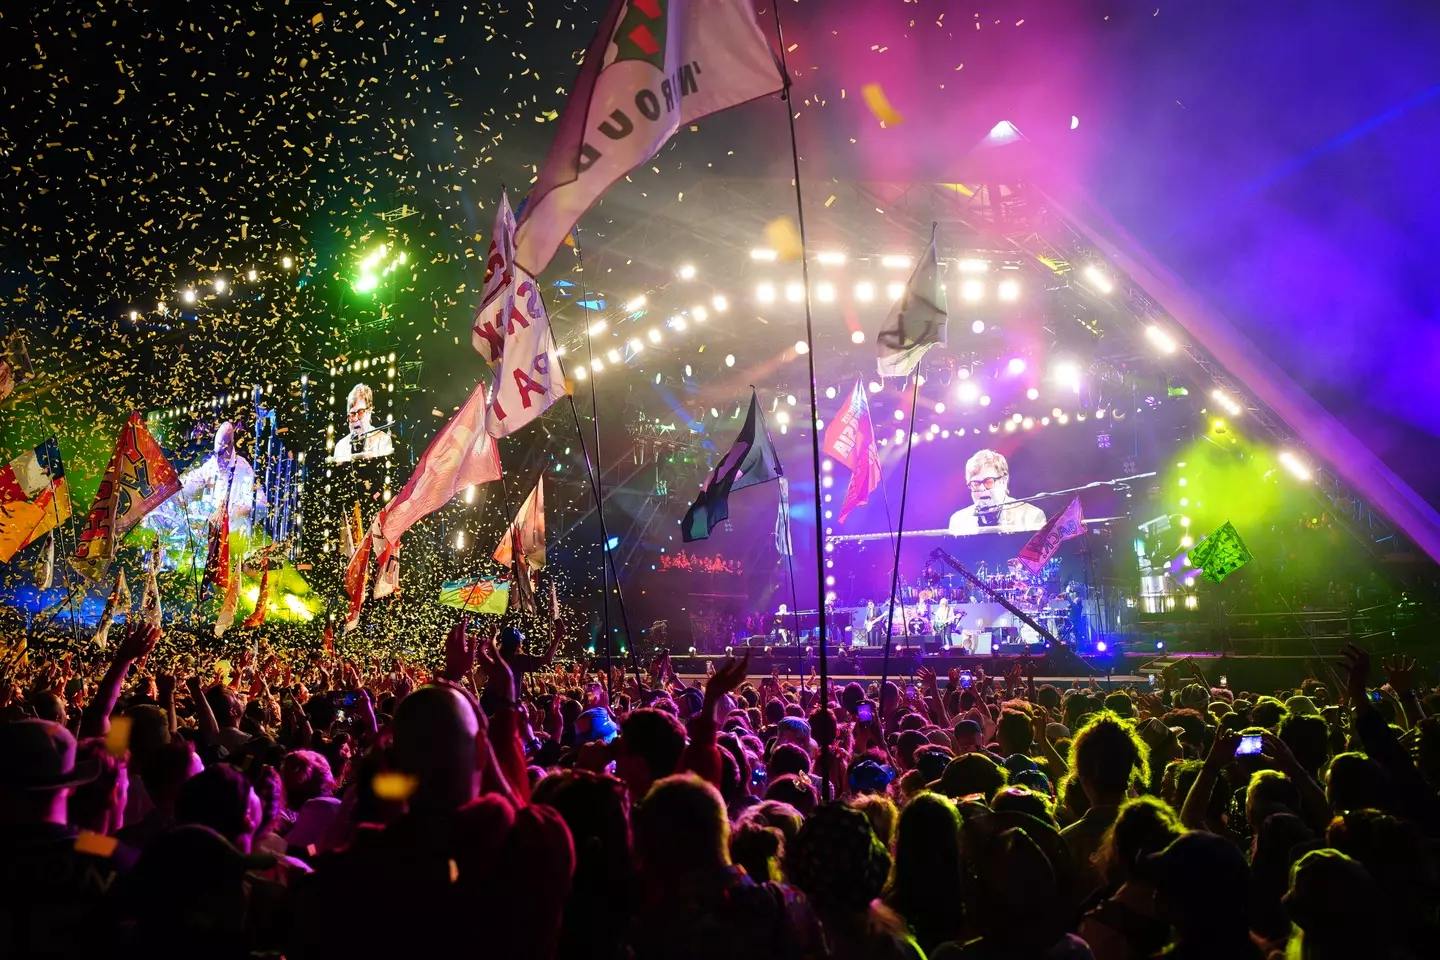 Thousands of revellers descended on the Pyramid stage to see Sir Elton John close out the weekend.